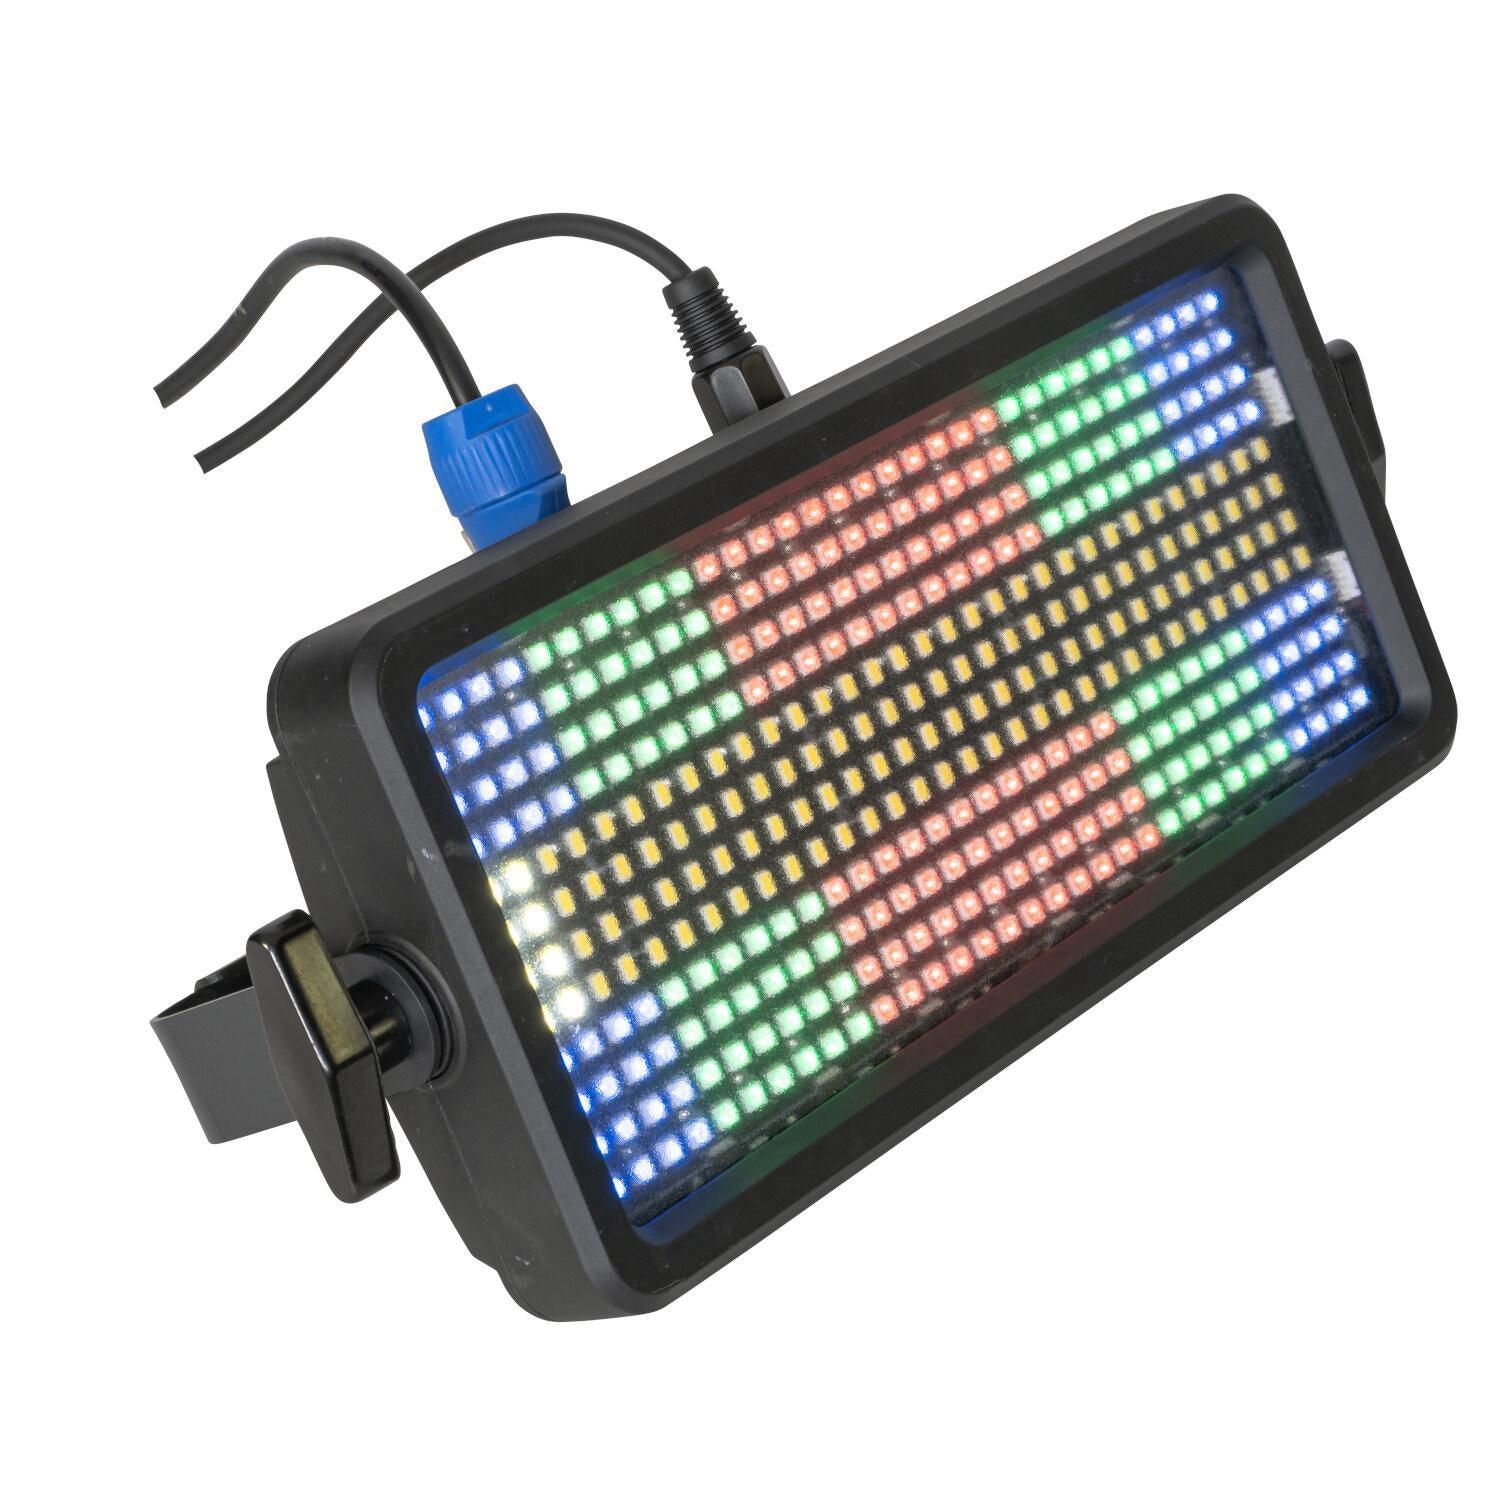 2 x AFX FLASH-COLOR-STROBE384 LED RGBW LED Strobe With DMX Cable - DY Pro Audio